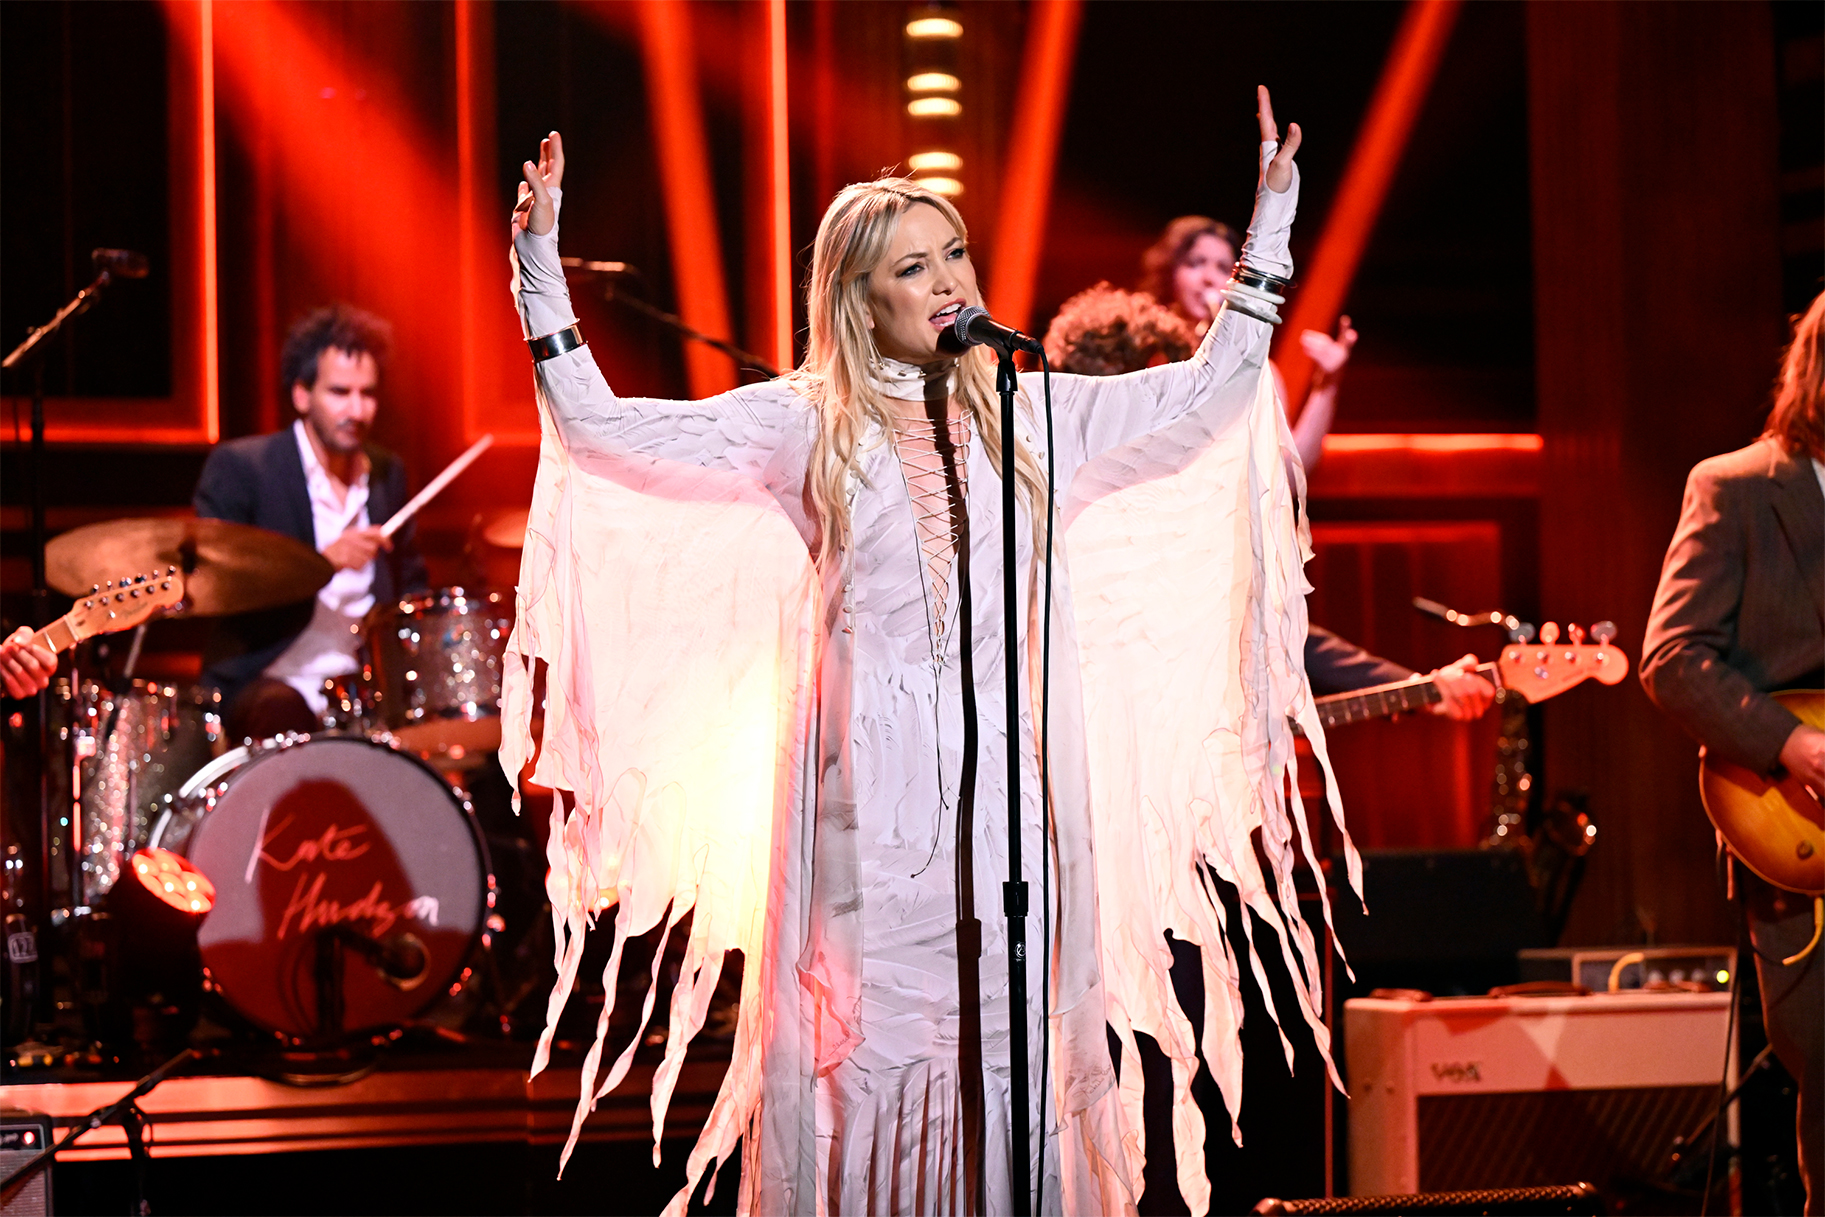 Kate Hudson's 'Glorious' Debut on The Tonight Show